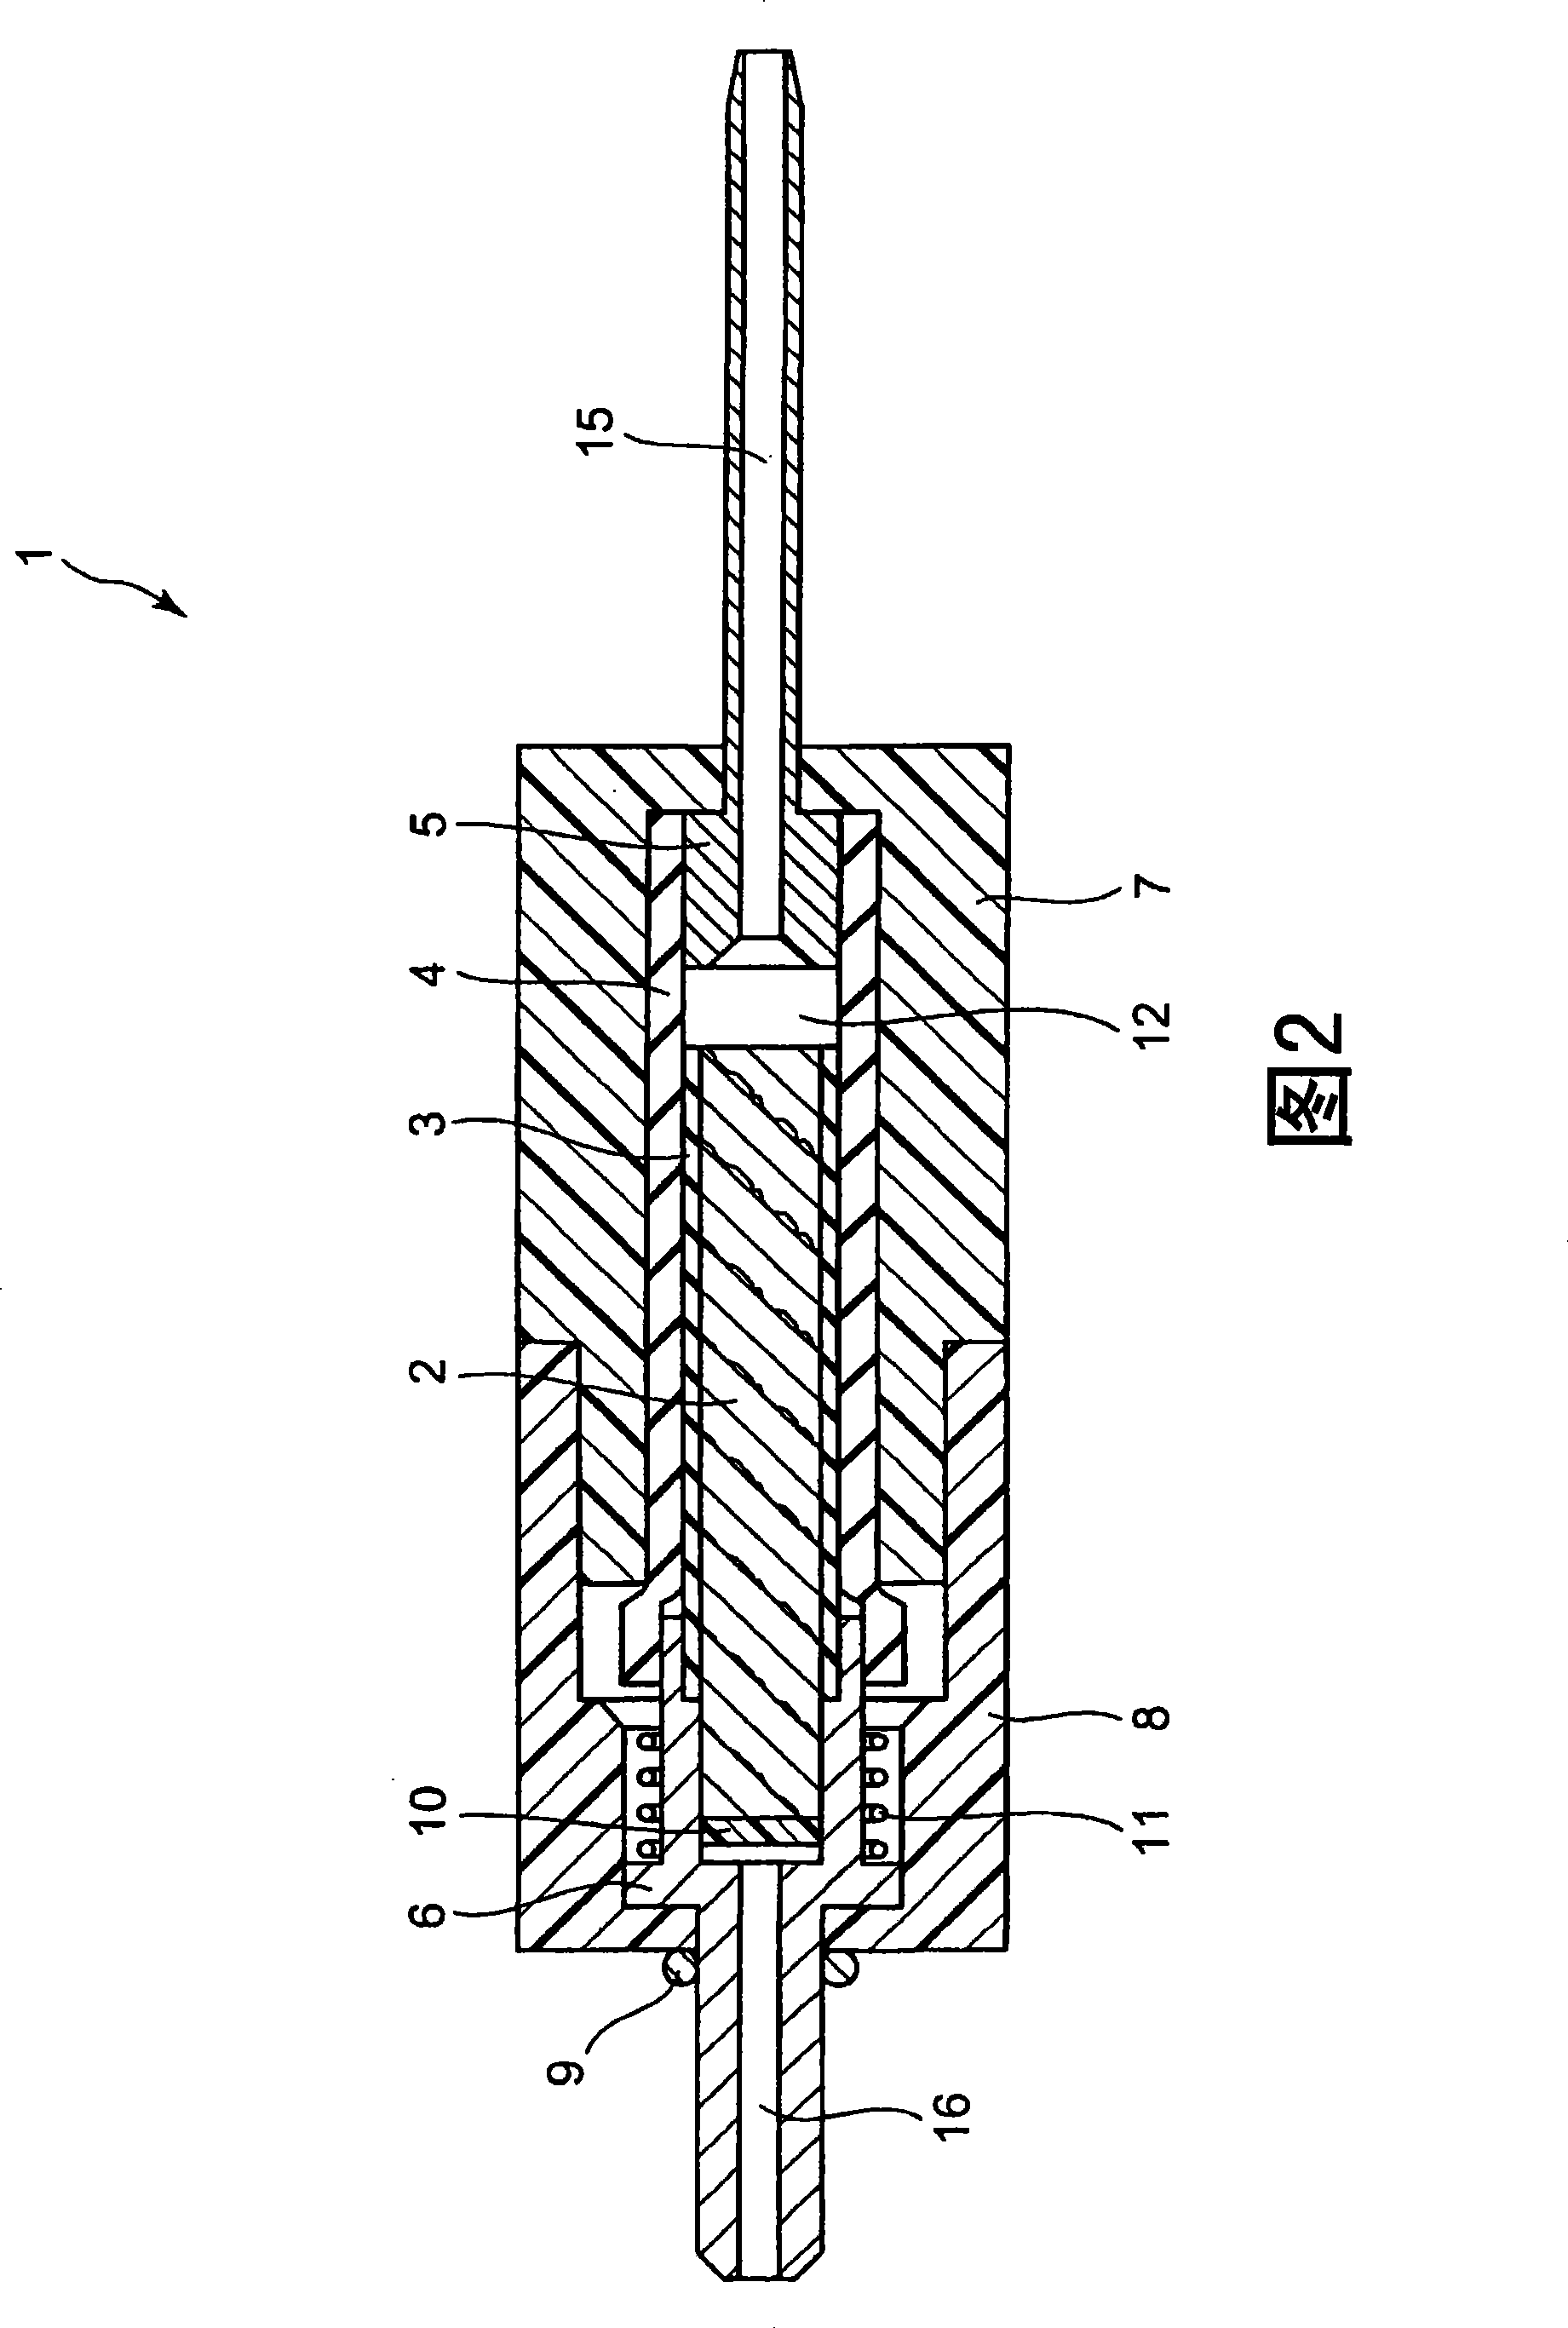 Vaporizing device and liquid absorbing portion